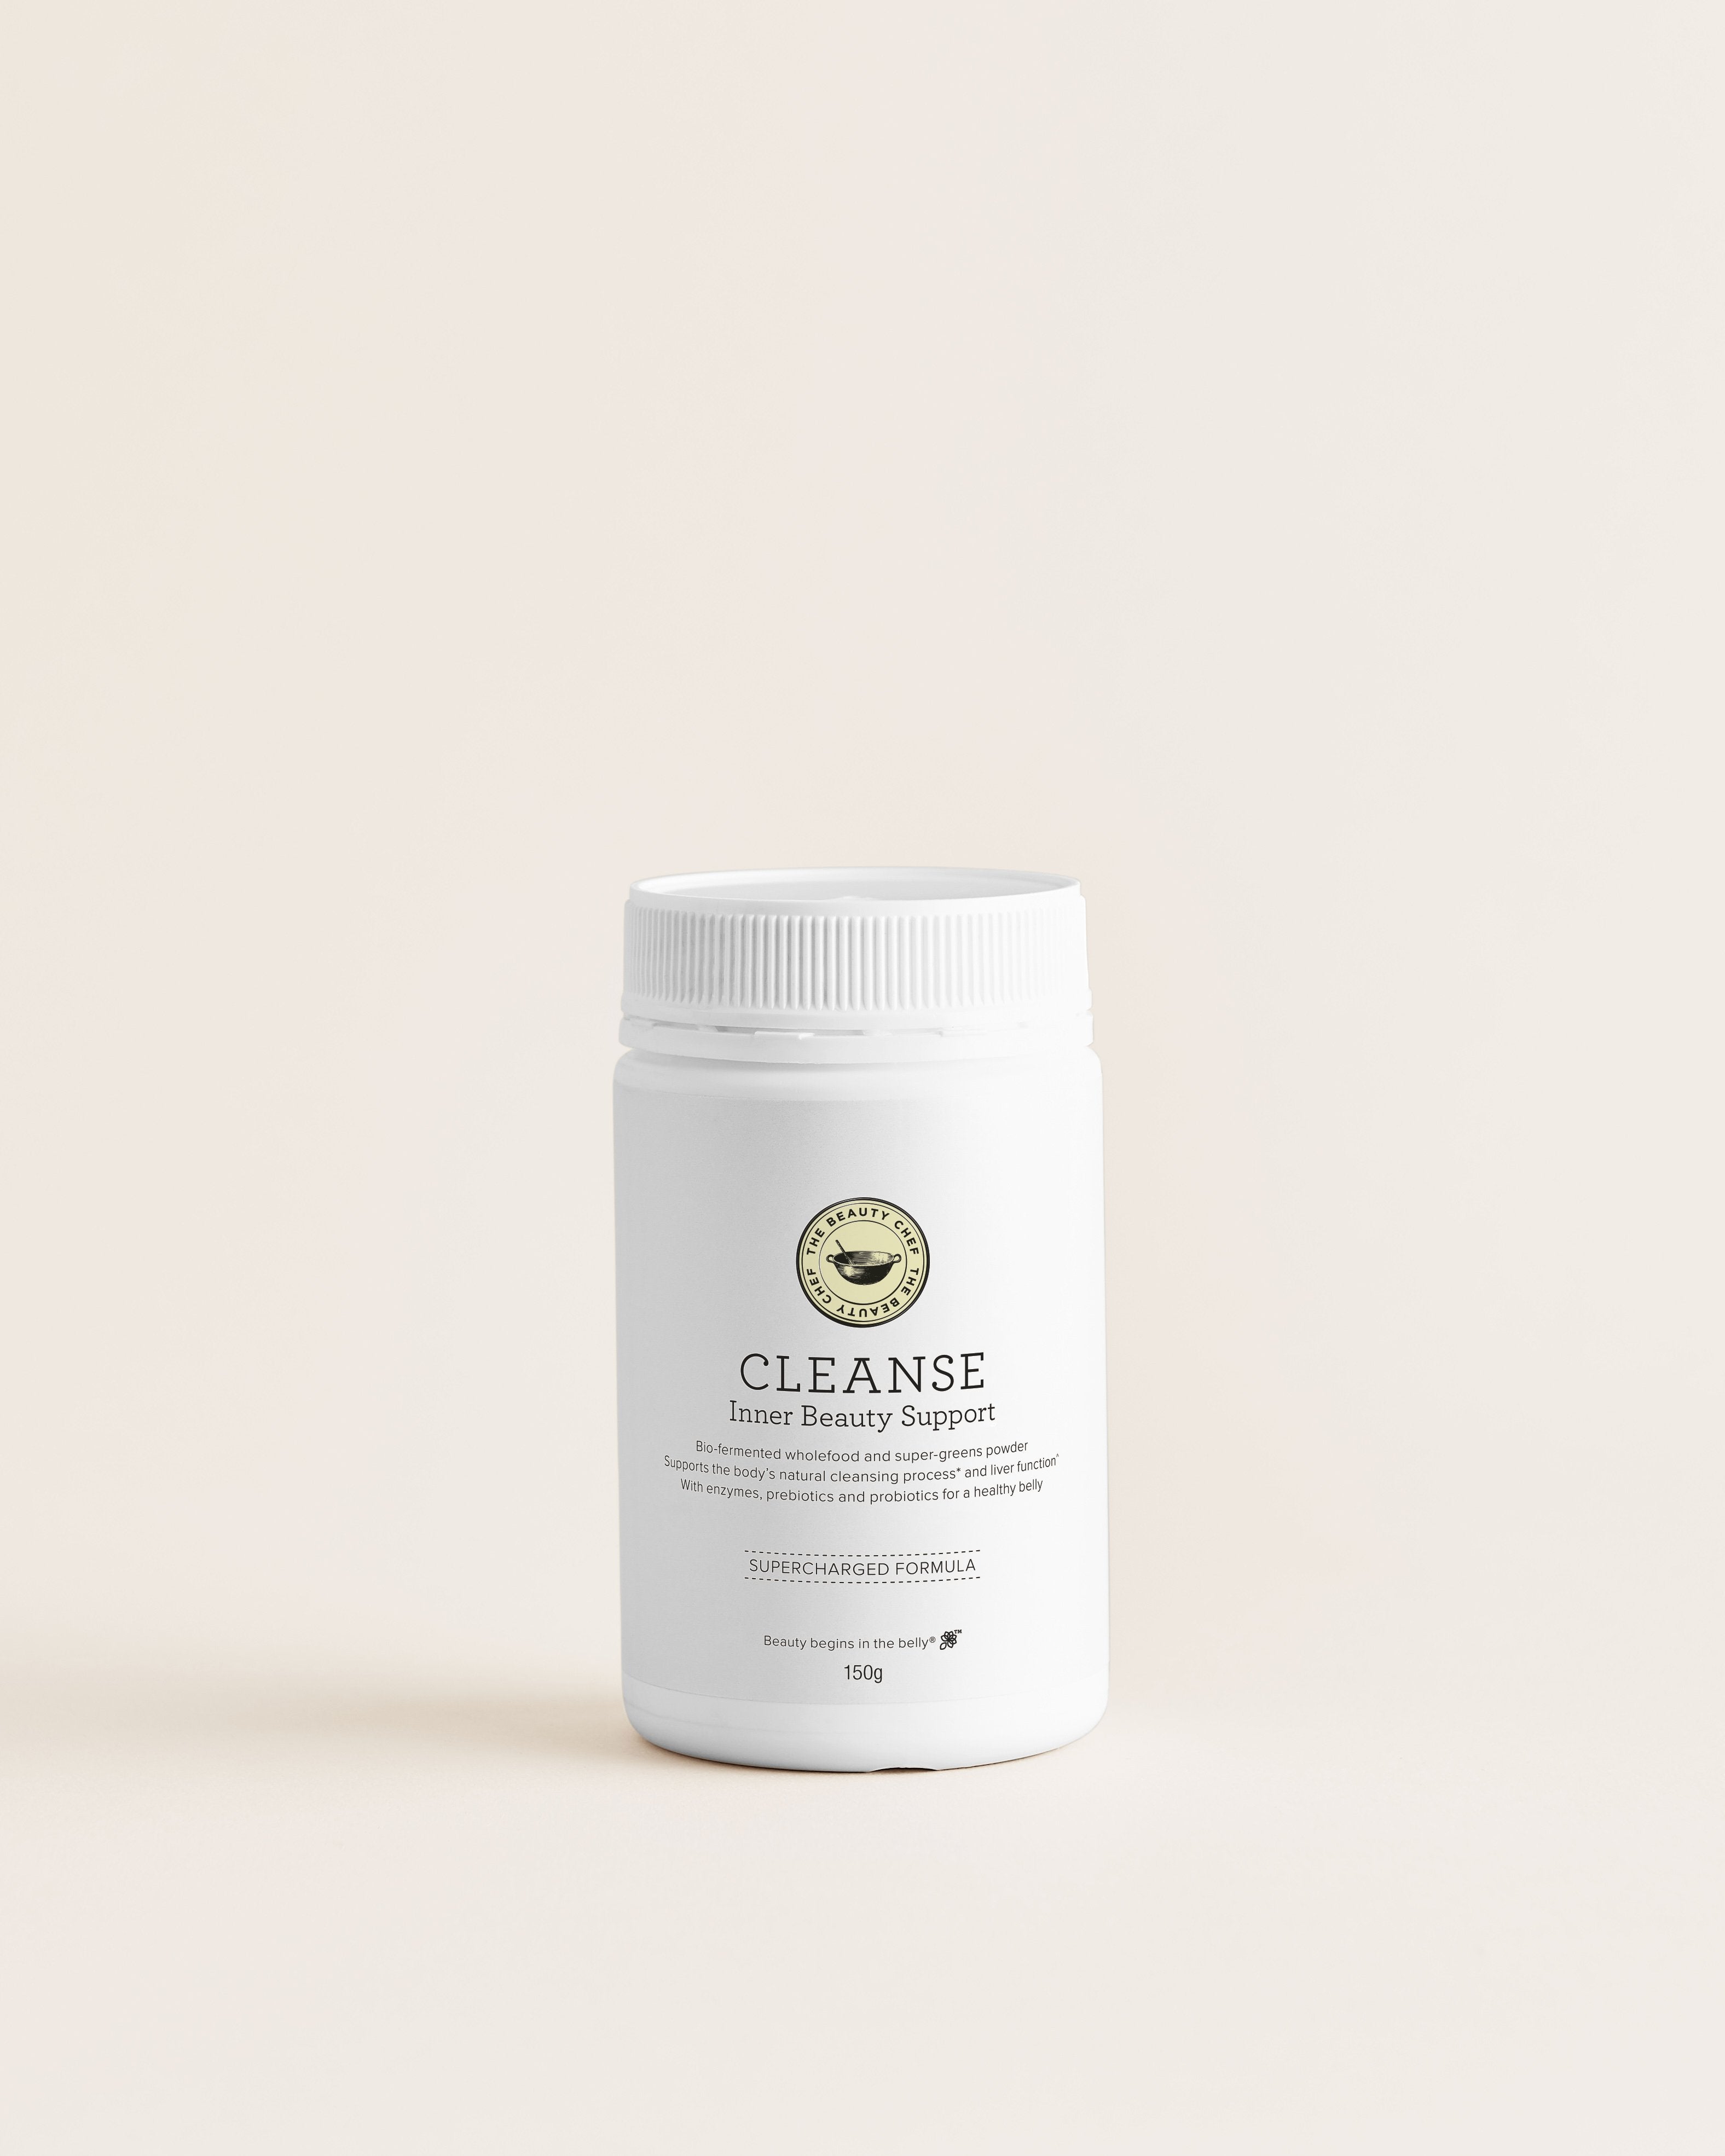 NEW CLEANSE Inner Beauty Support (Supercharged Formula)